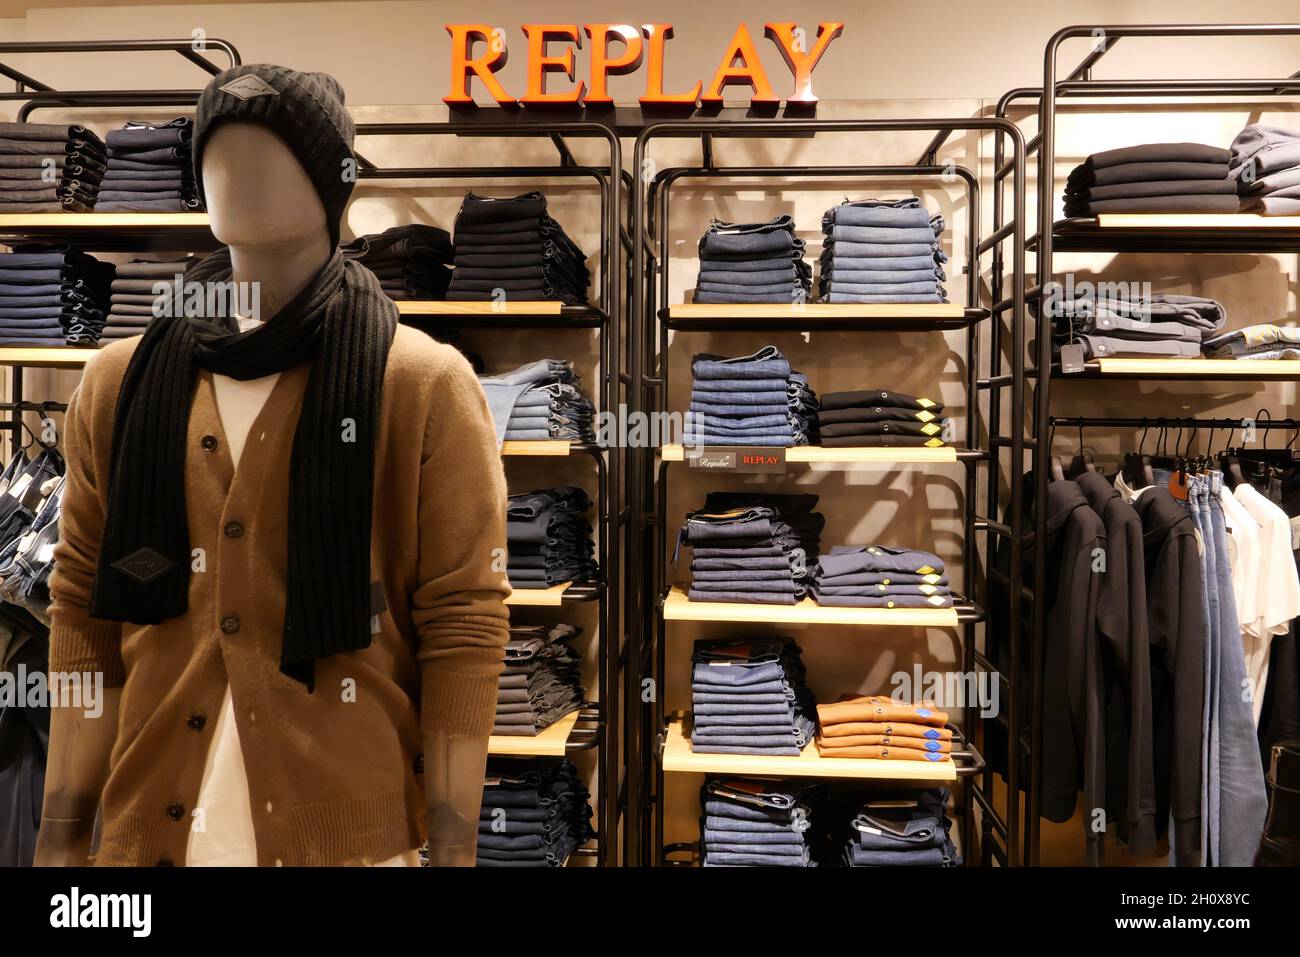 REPLAY CLOTHING ON DISPLAY INSIDE THE FASHION STORE Stock Photo - Alamy